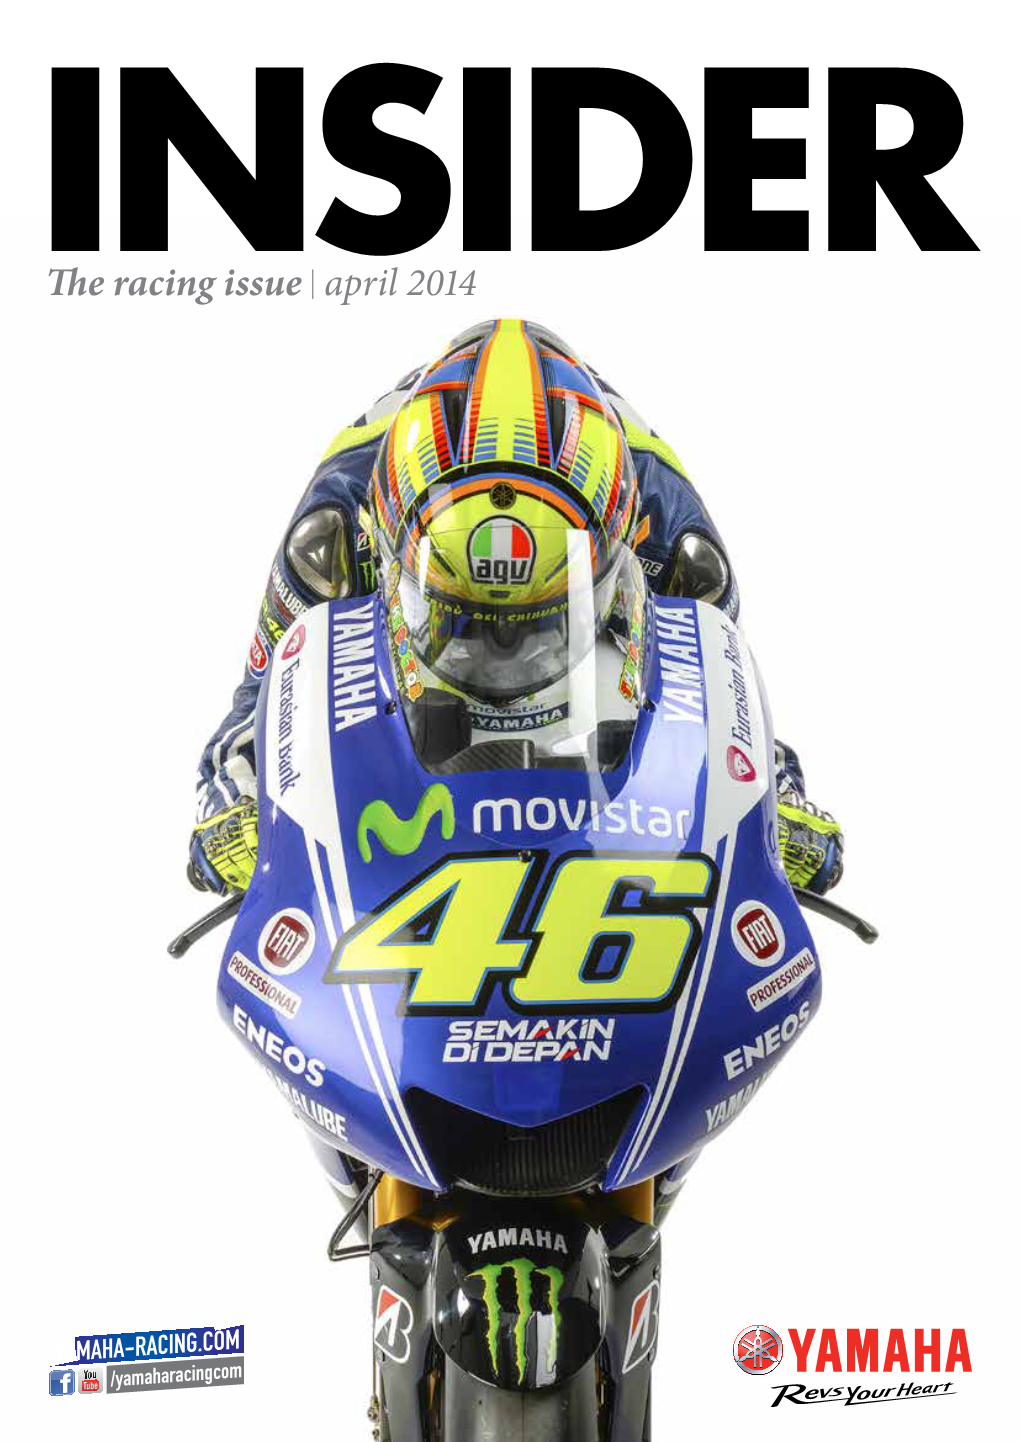 The Racing Issue | April 2014 in This 4 6 8 10 Issue